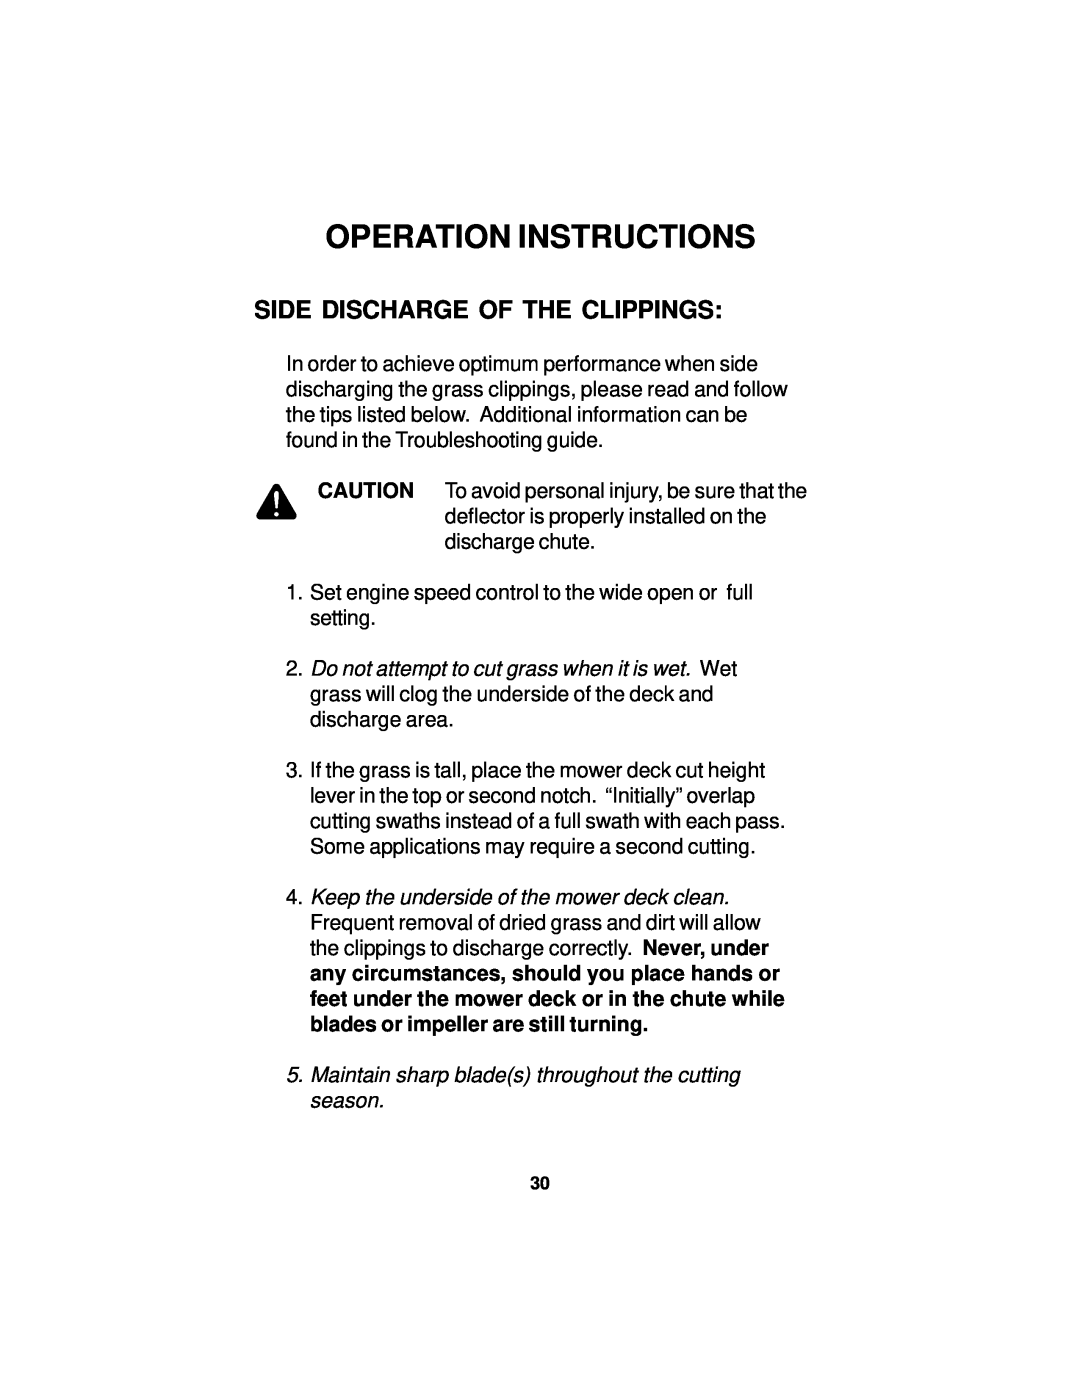 Dixon 18124-0804 manual Side Discharge Of The Clippings, Operation Instructions 